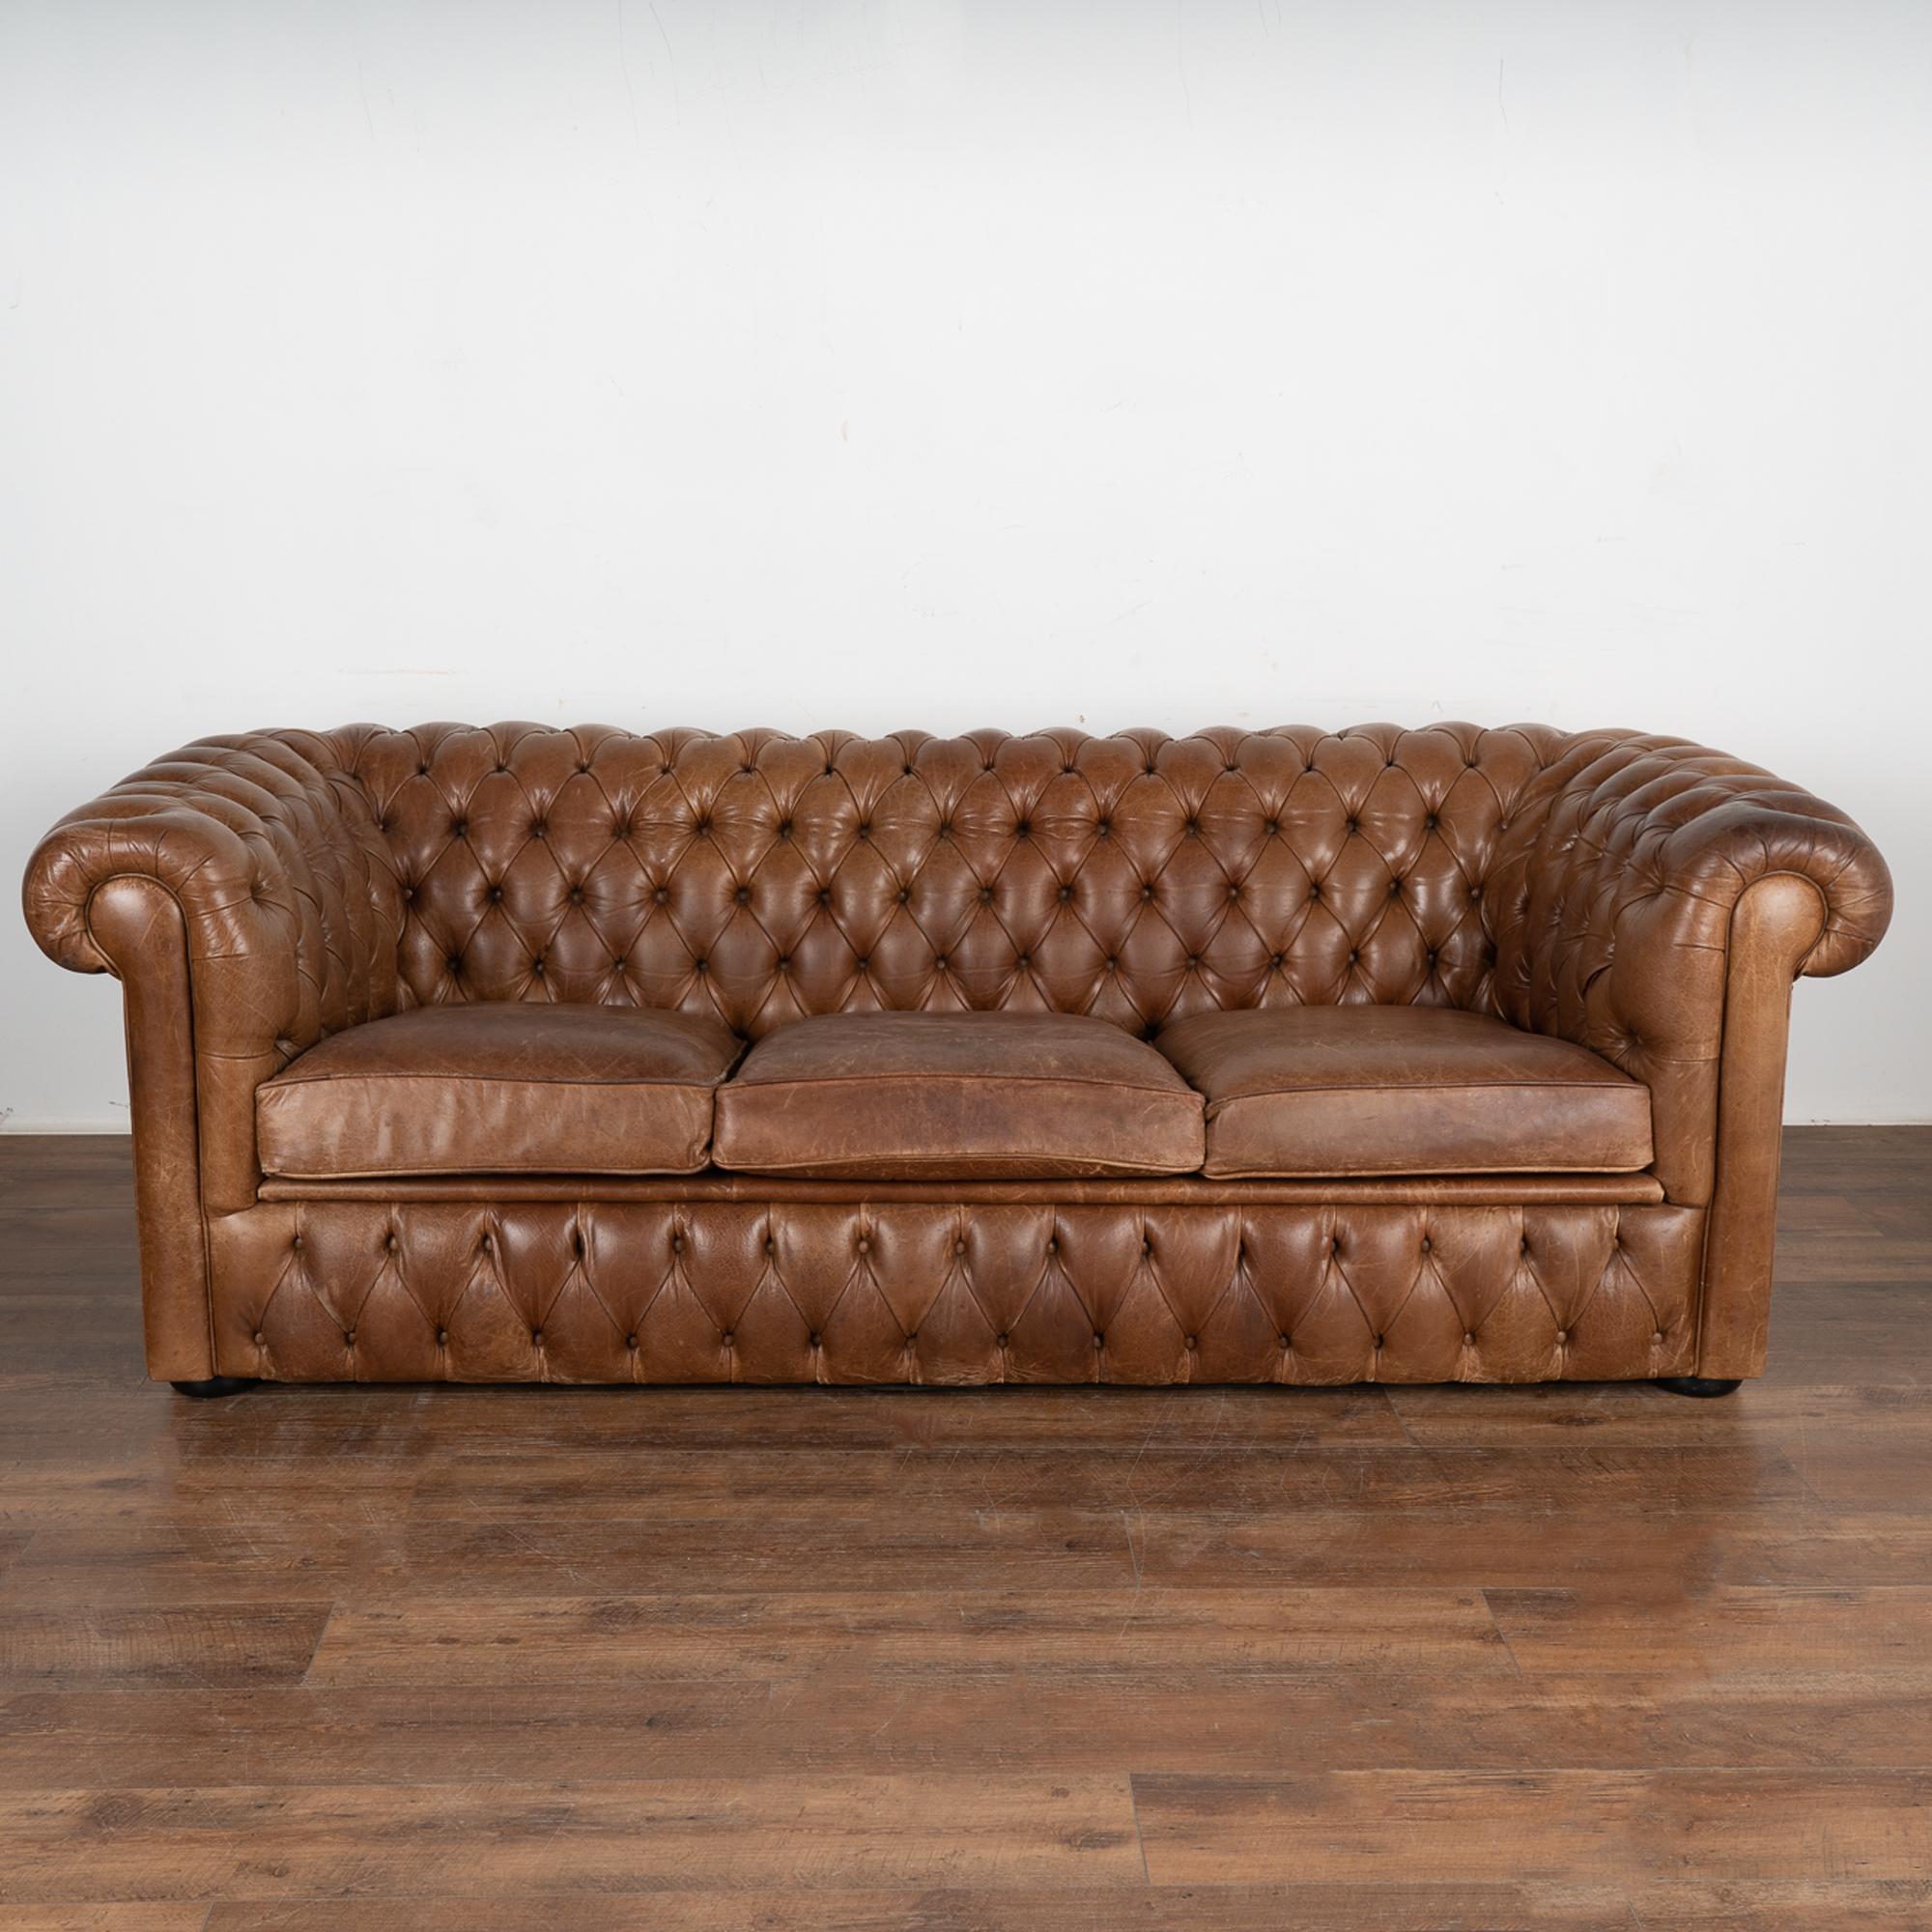 Danish Vintage Brown Leather Three Seat Chesterfield Sofa, Denmark circa 1960-70 For Sale